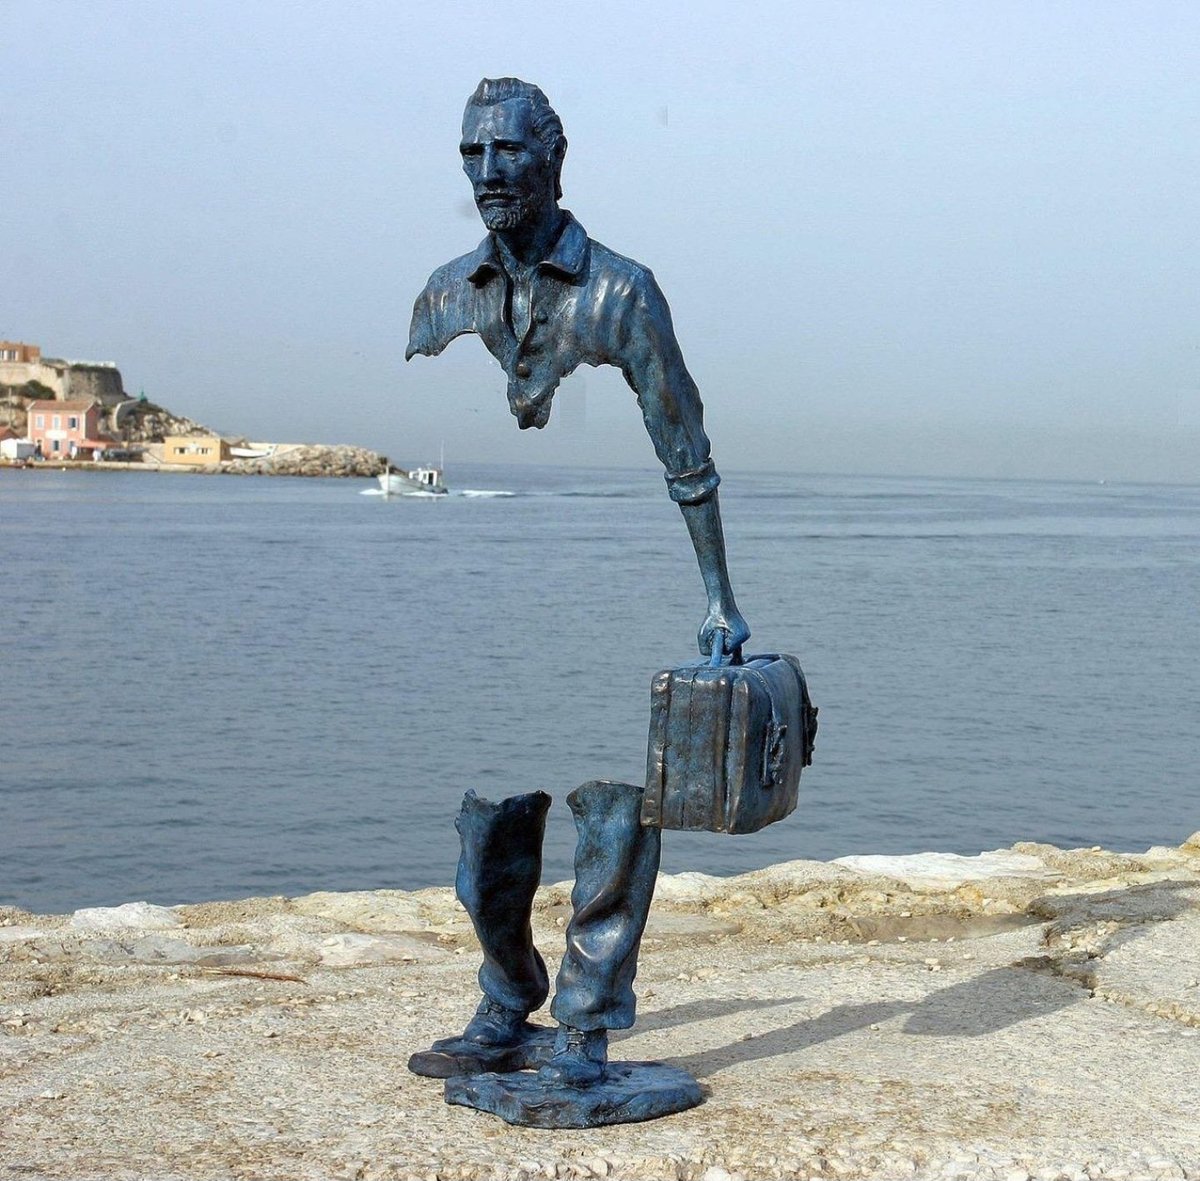 Art matters.... Sculpture by Bruno Catalano depicts the deep sense of emptiness felt by migrants as they leave their homeland, parting from their loved ones and community, in search of a better life....